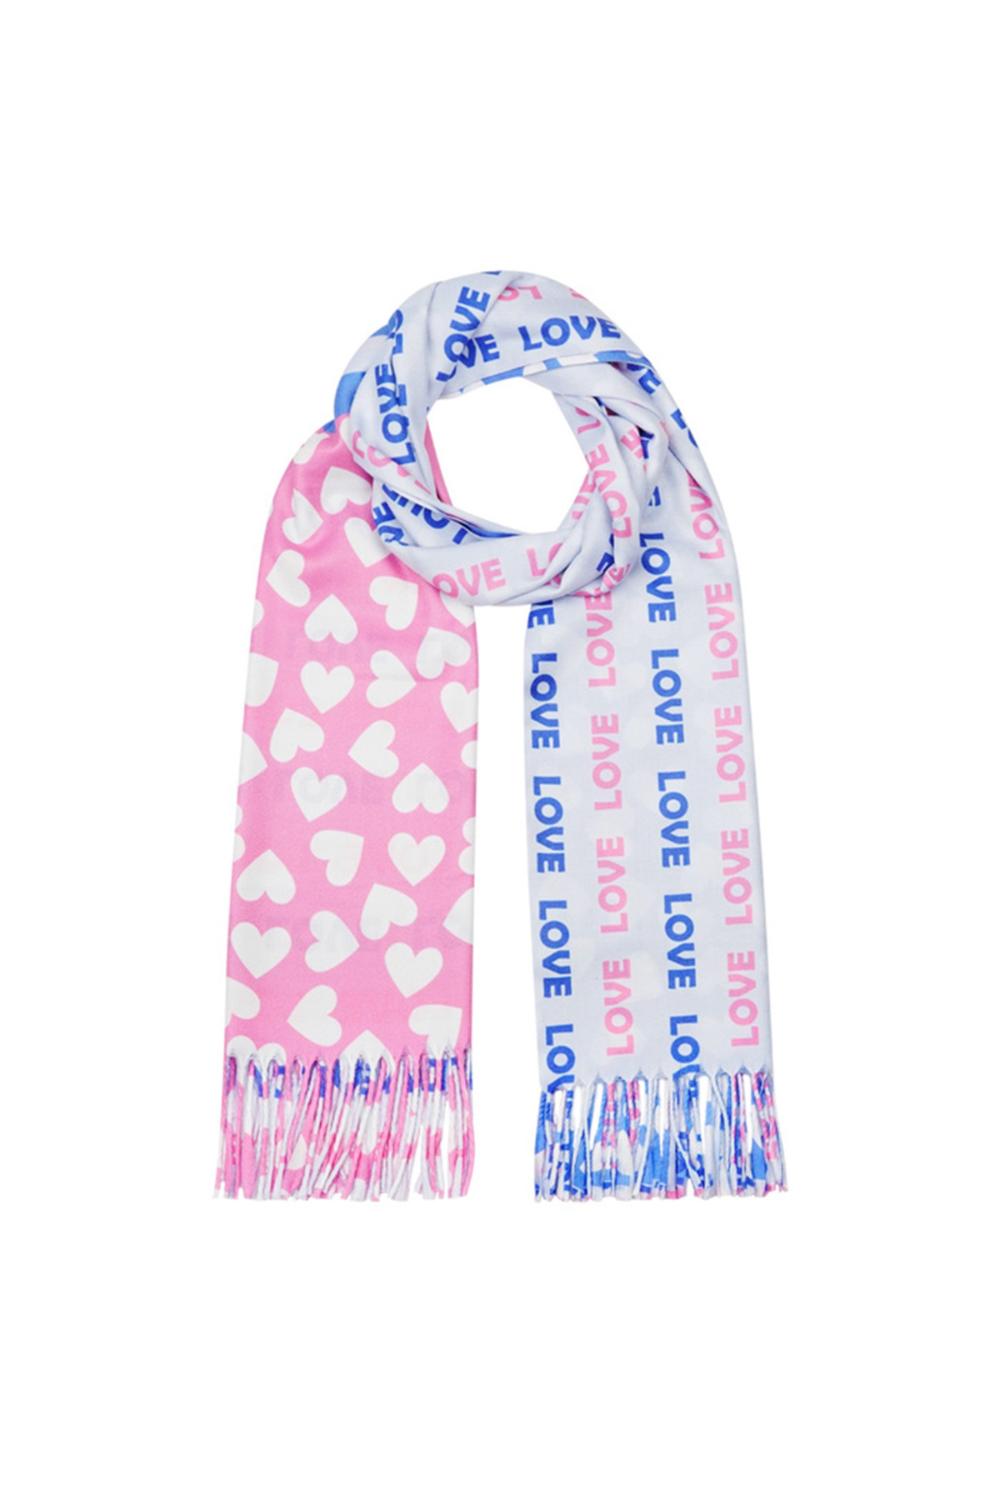 Scarf double print pink blue